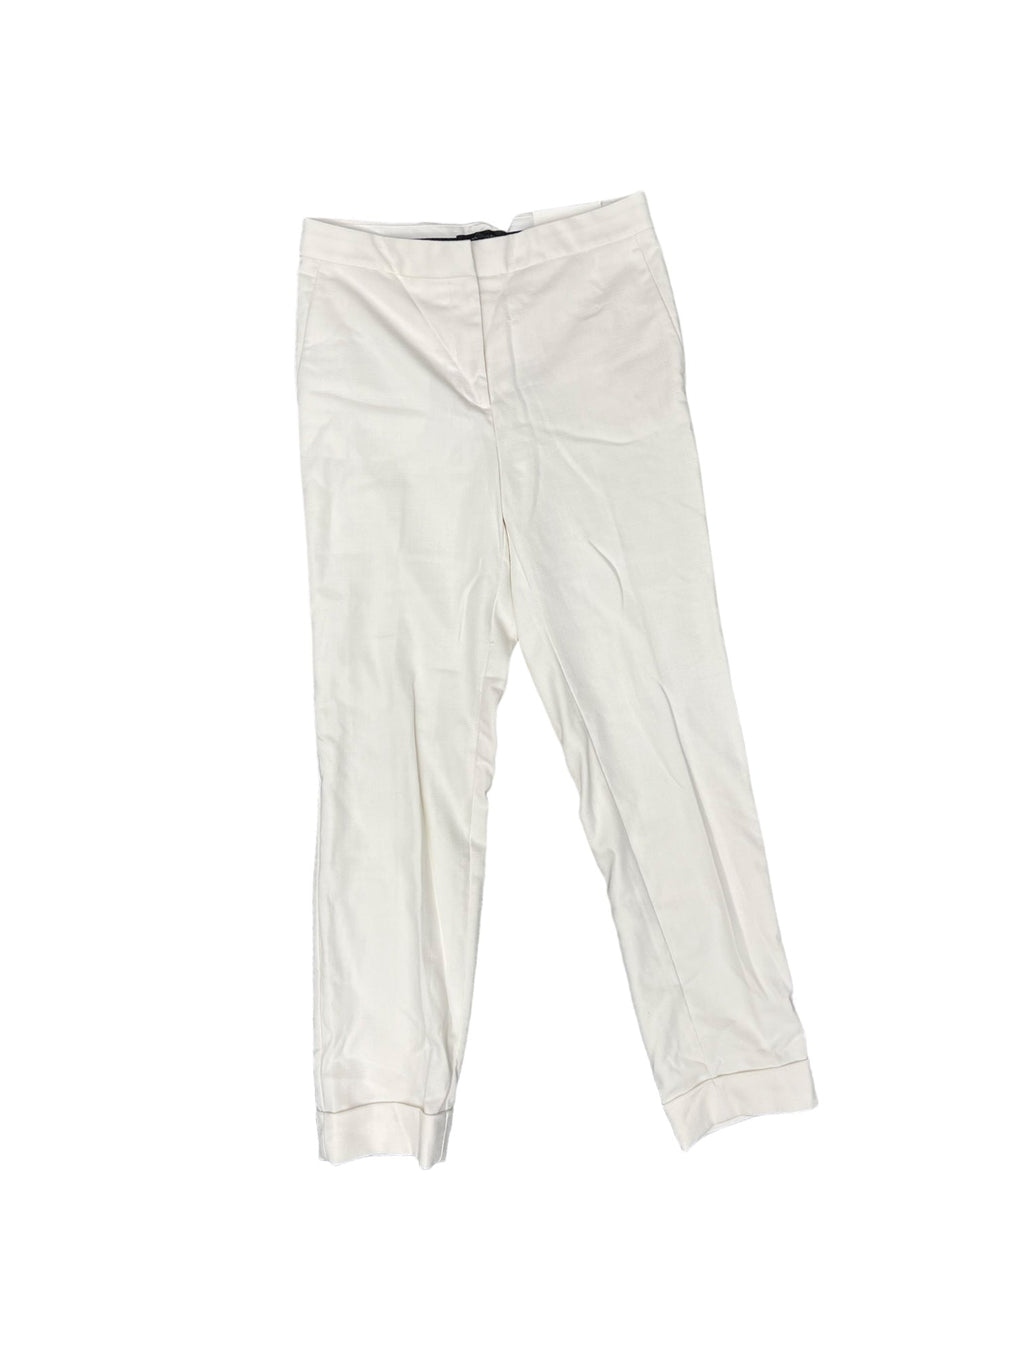 Reel Legends White Cropped Pants for Women